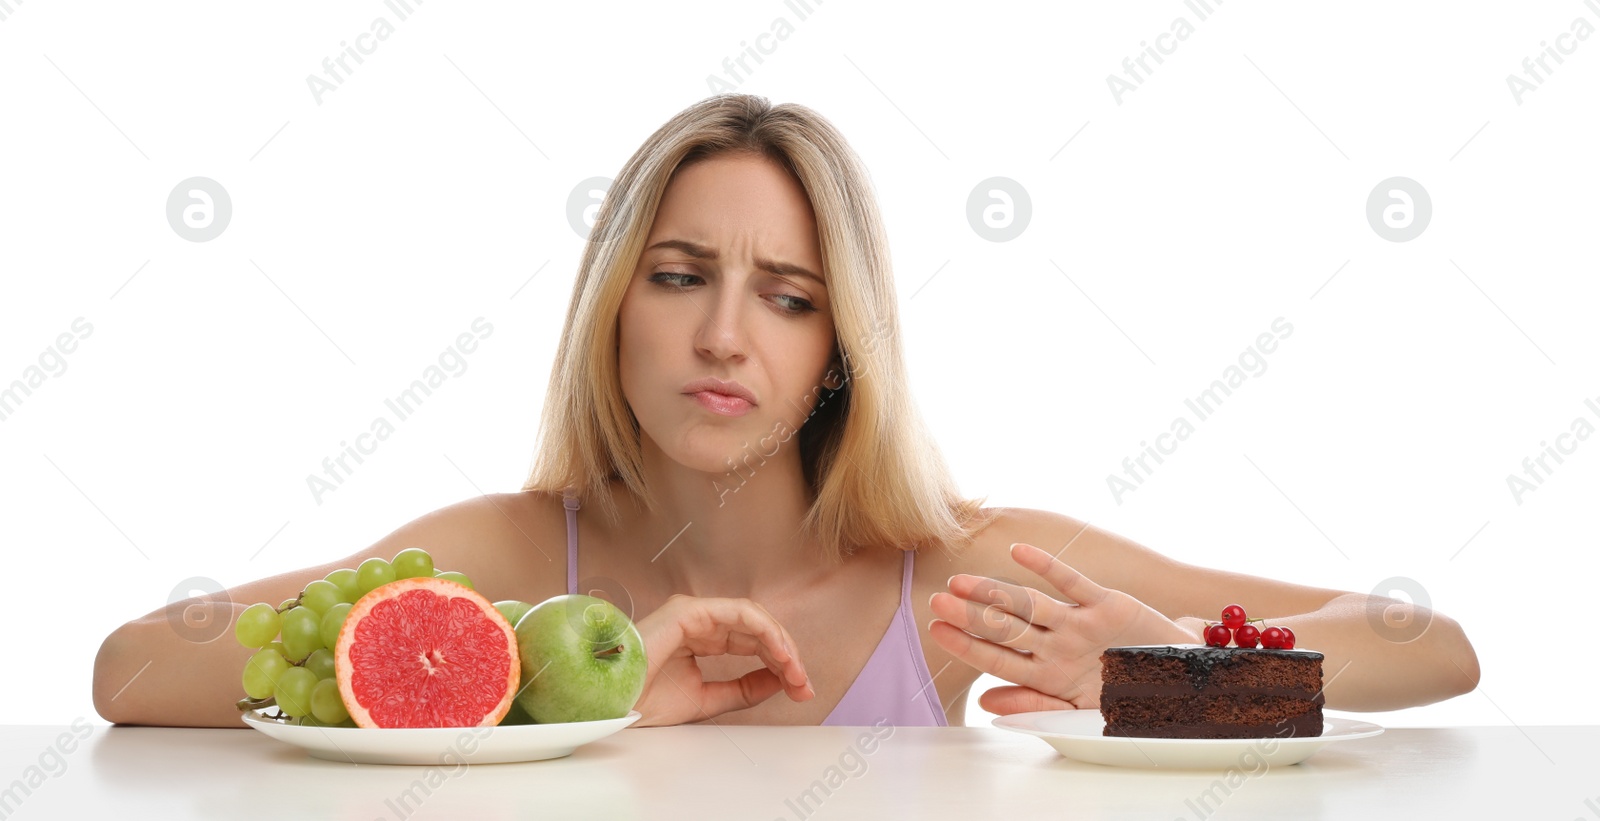 Photo of Woman choosing between cake and healthy fruits at table on white background